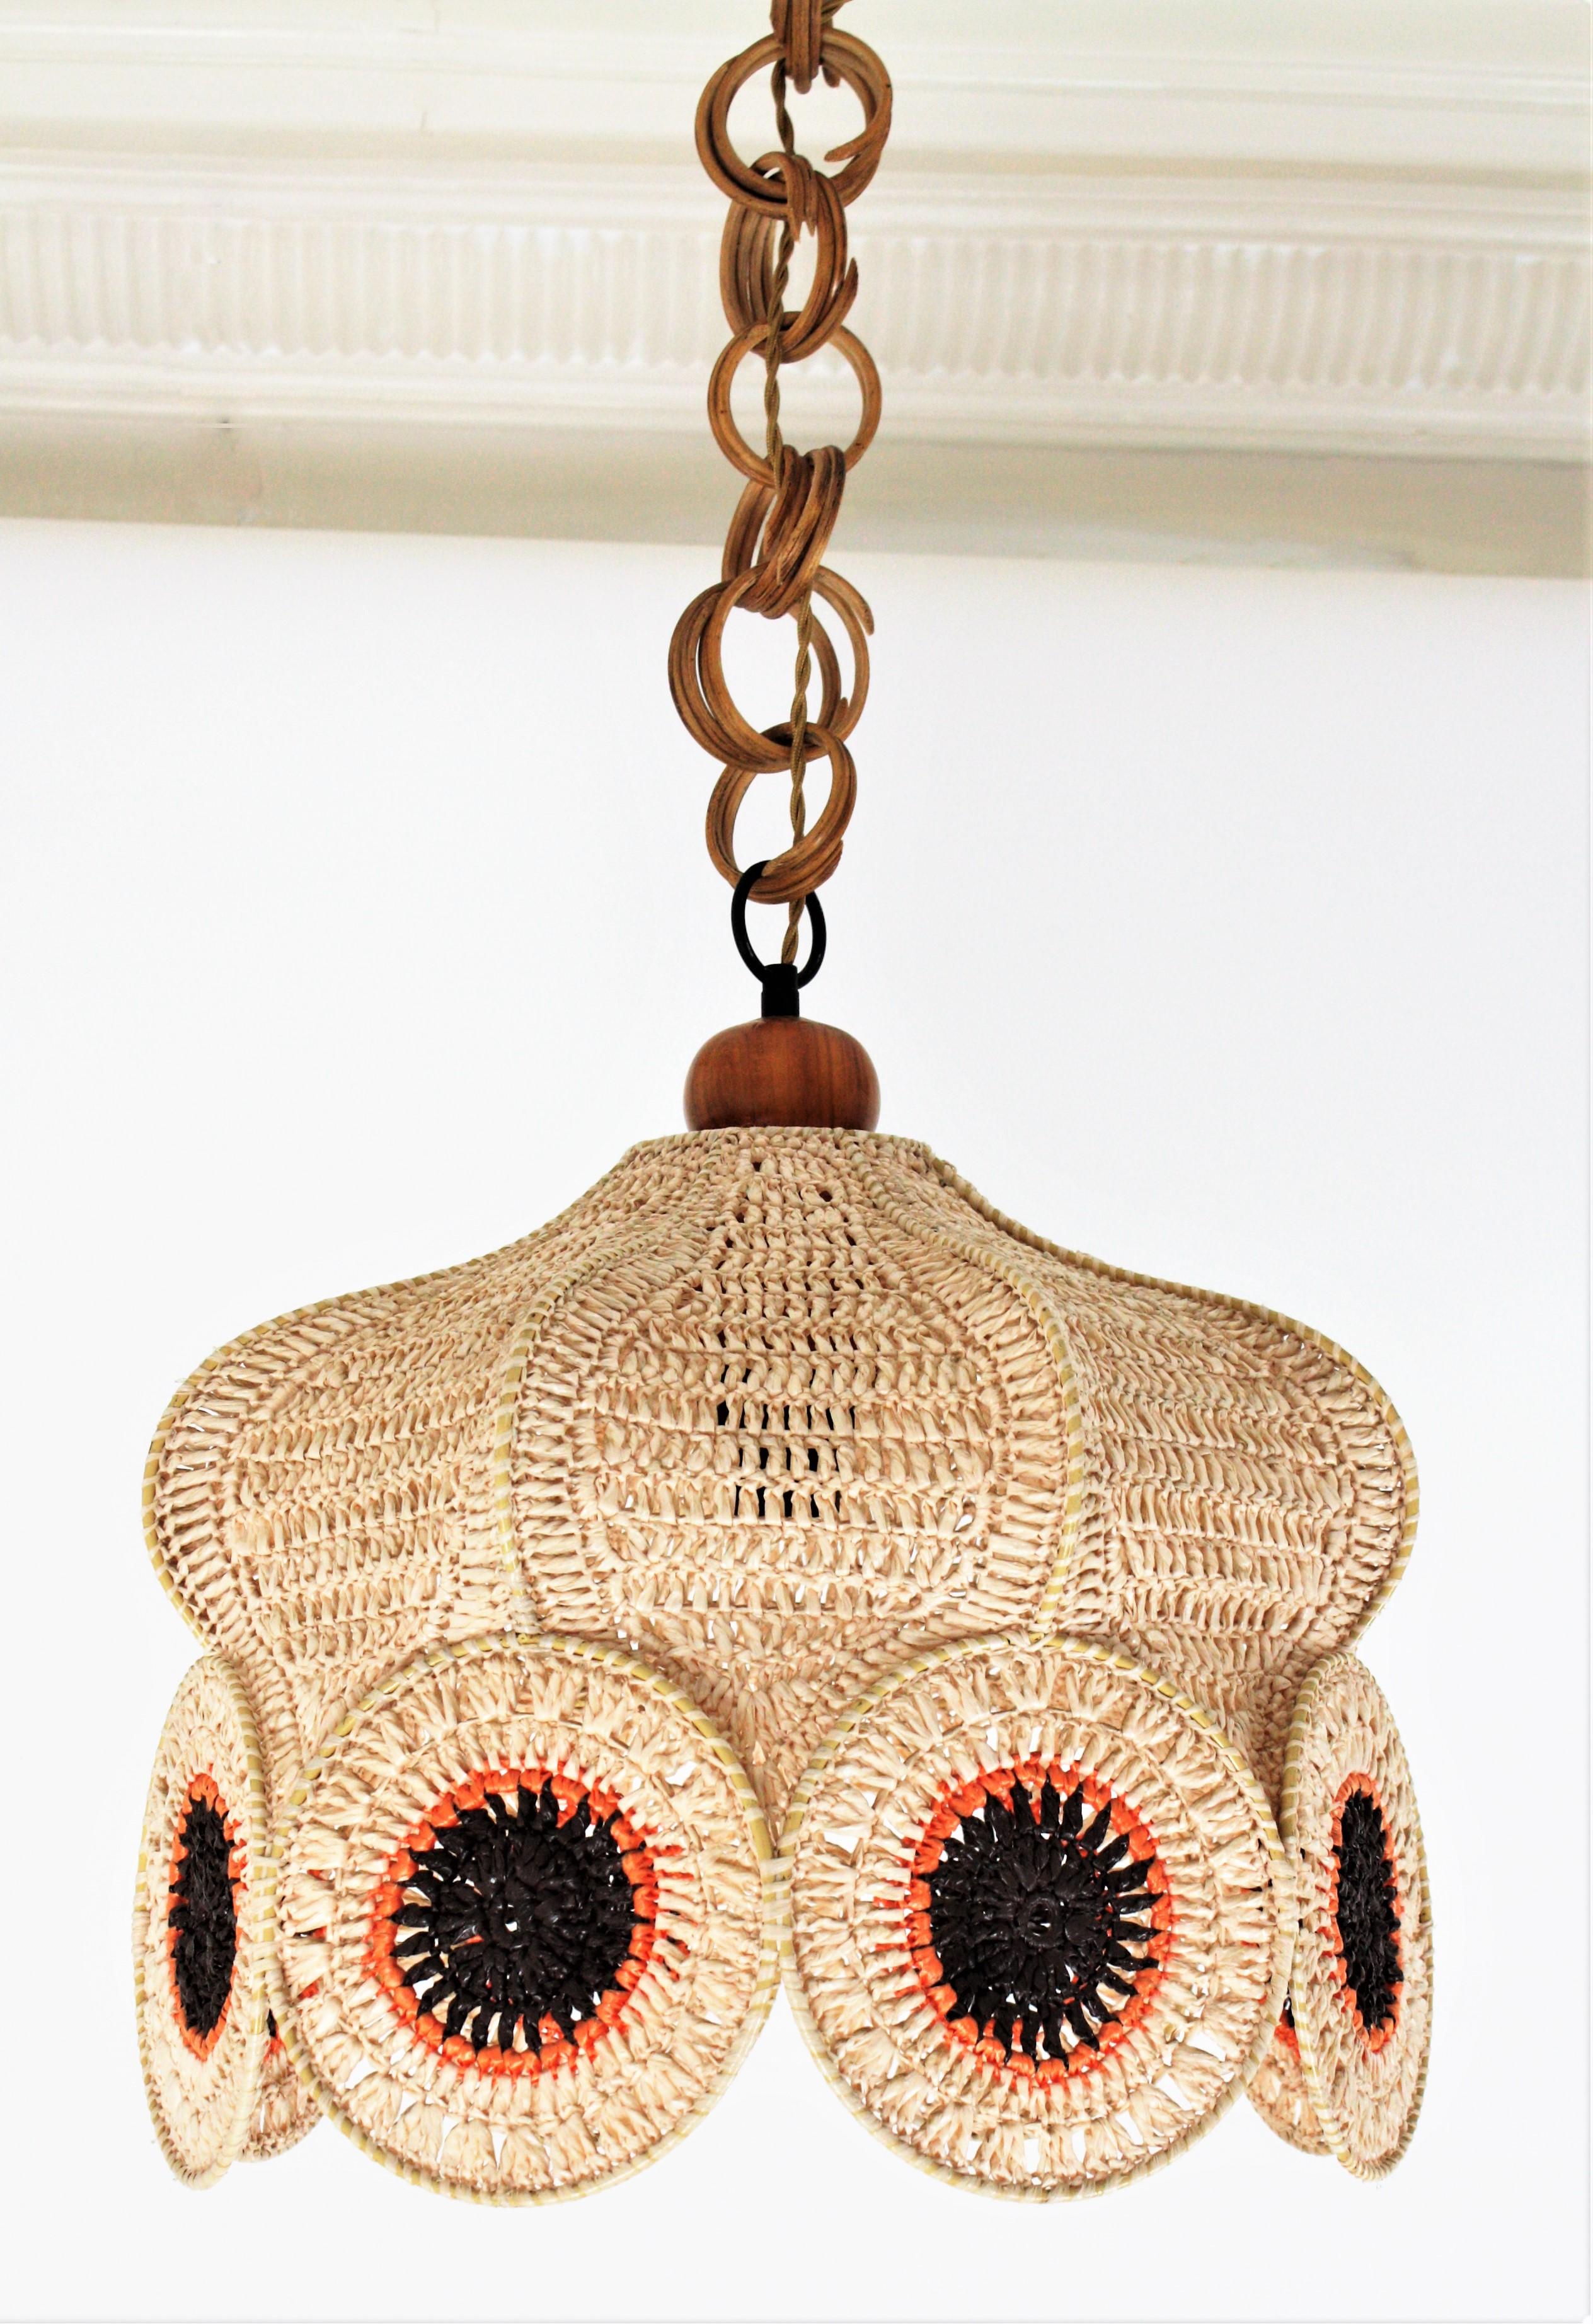 A funny Bohemian hand knotted macramé suspension lamp with colorful circles accenting the bottom. Spain, 1960s-1970s.
This handcrafted chandelier features a shade made of hand knotted macrame acrylic cord. The top of the shade is adorned by a wooden